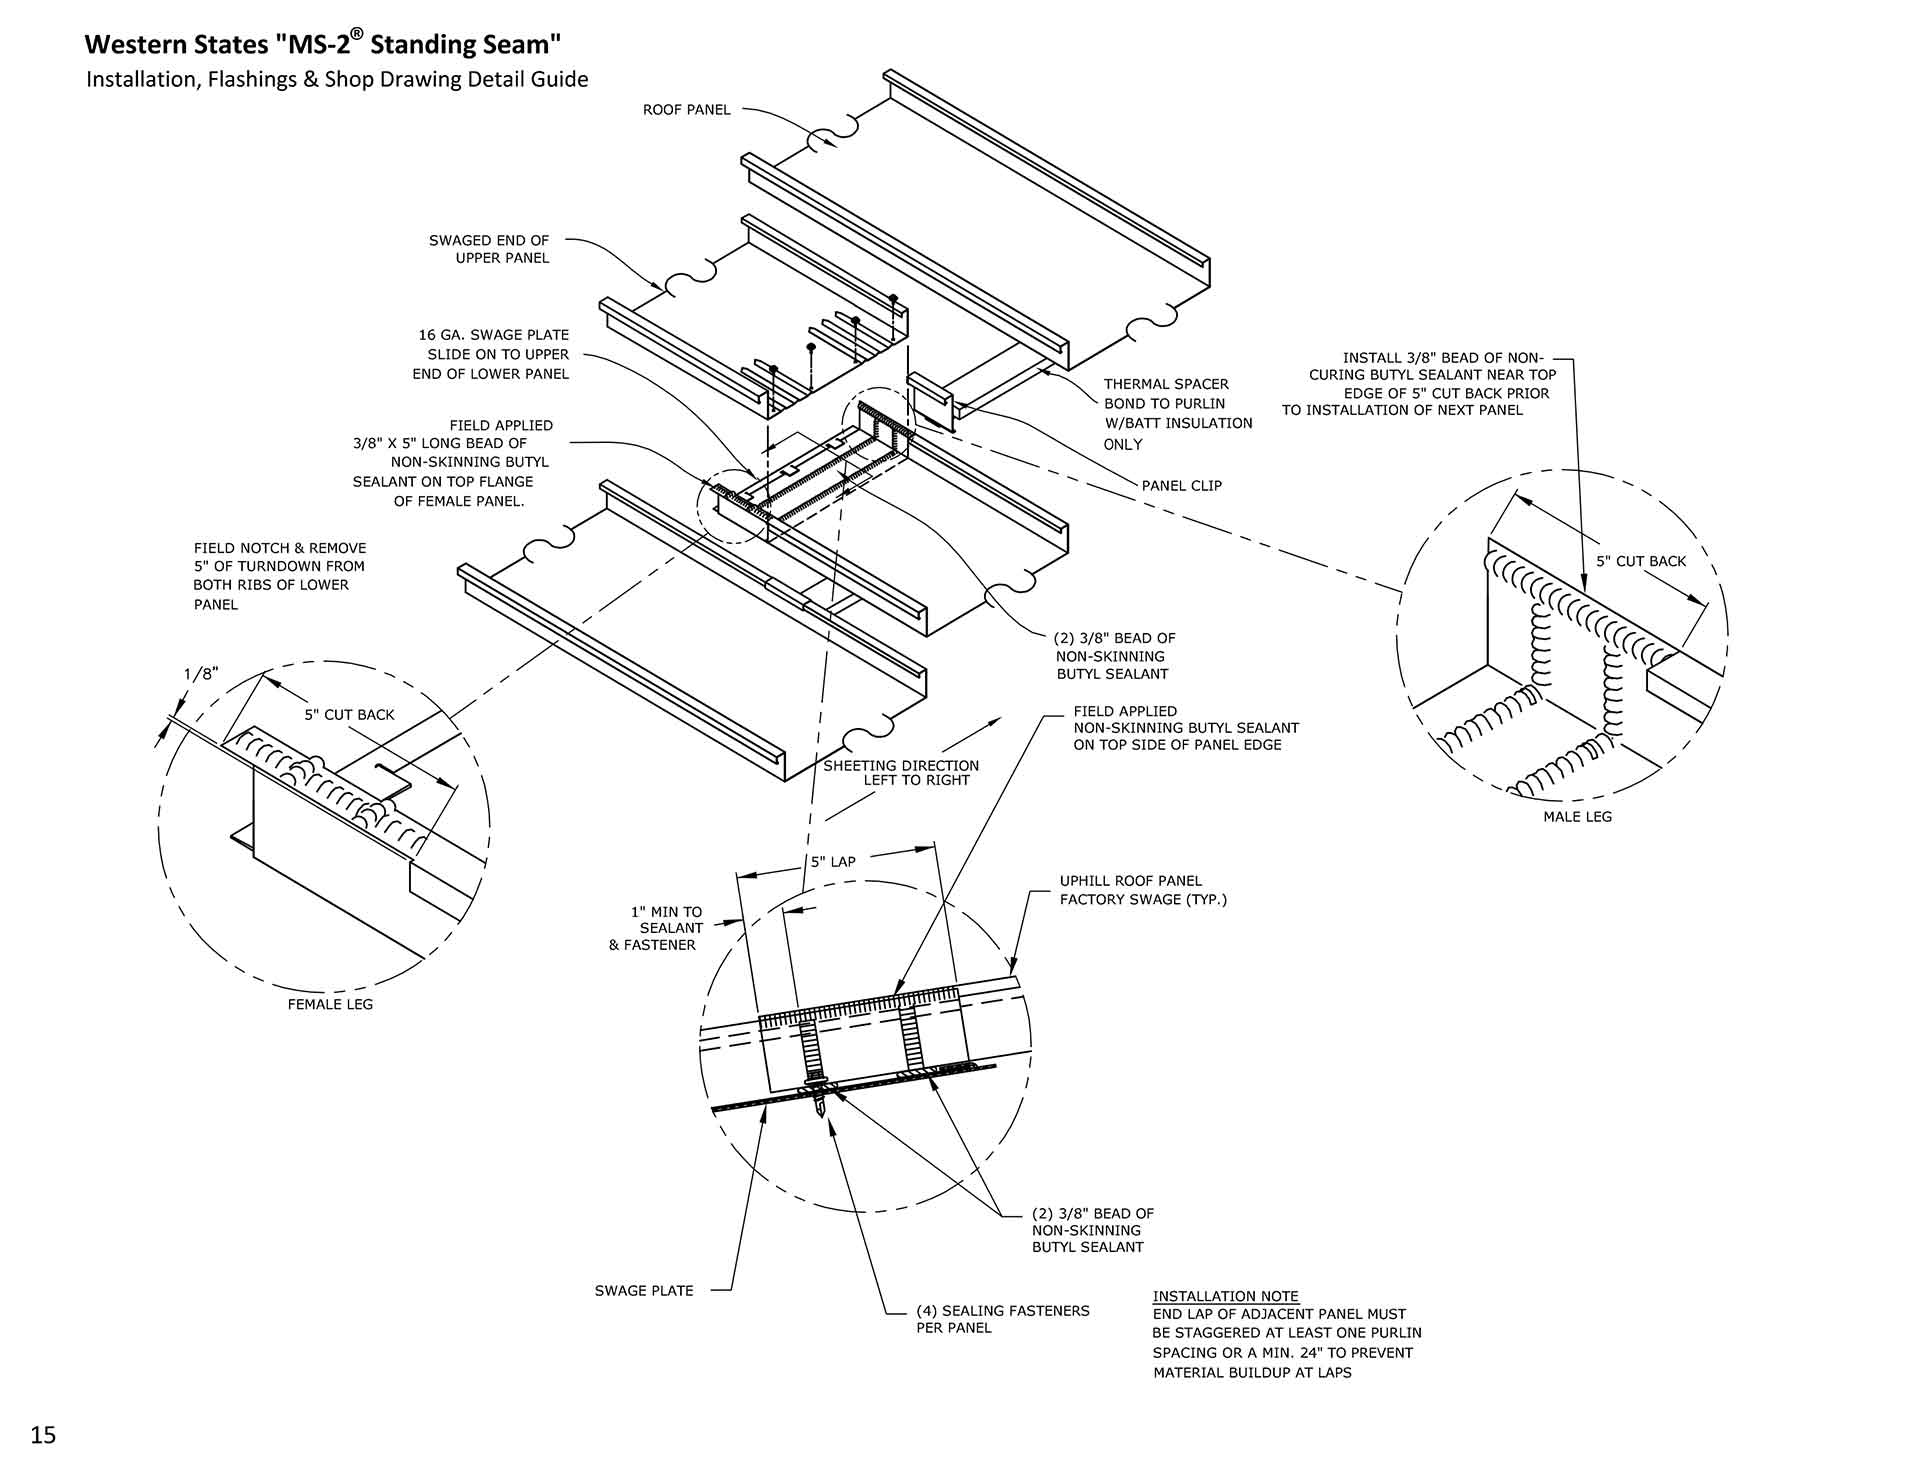 End Lap Detail For Western Lock® Standing Seam